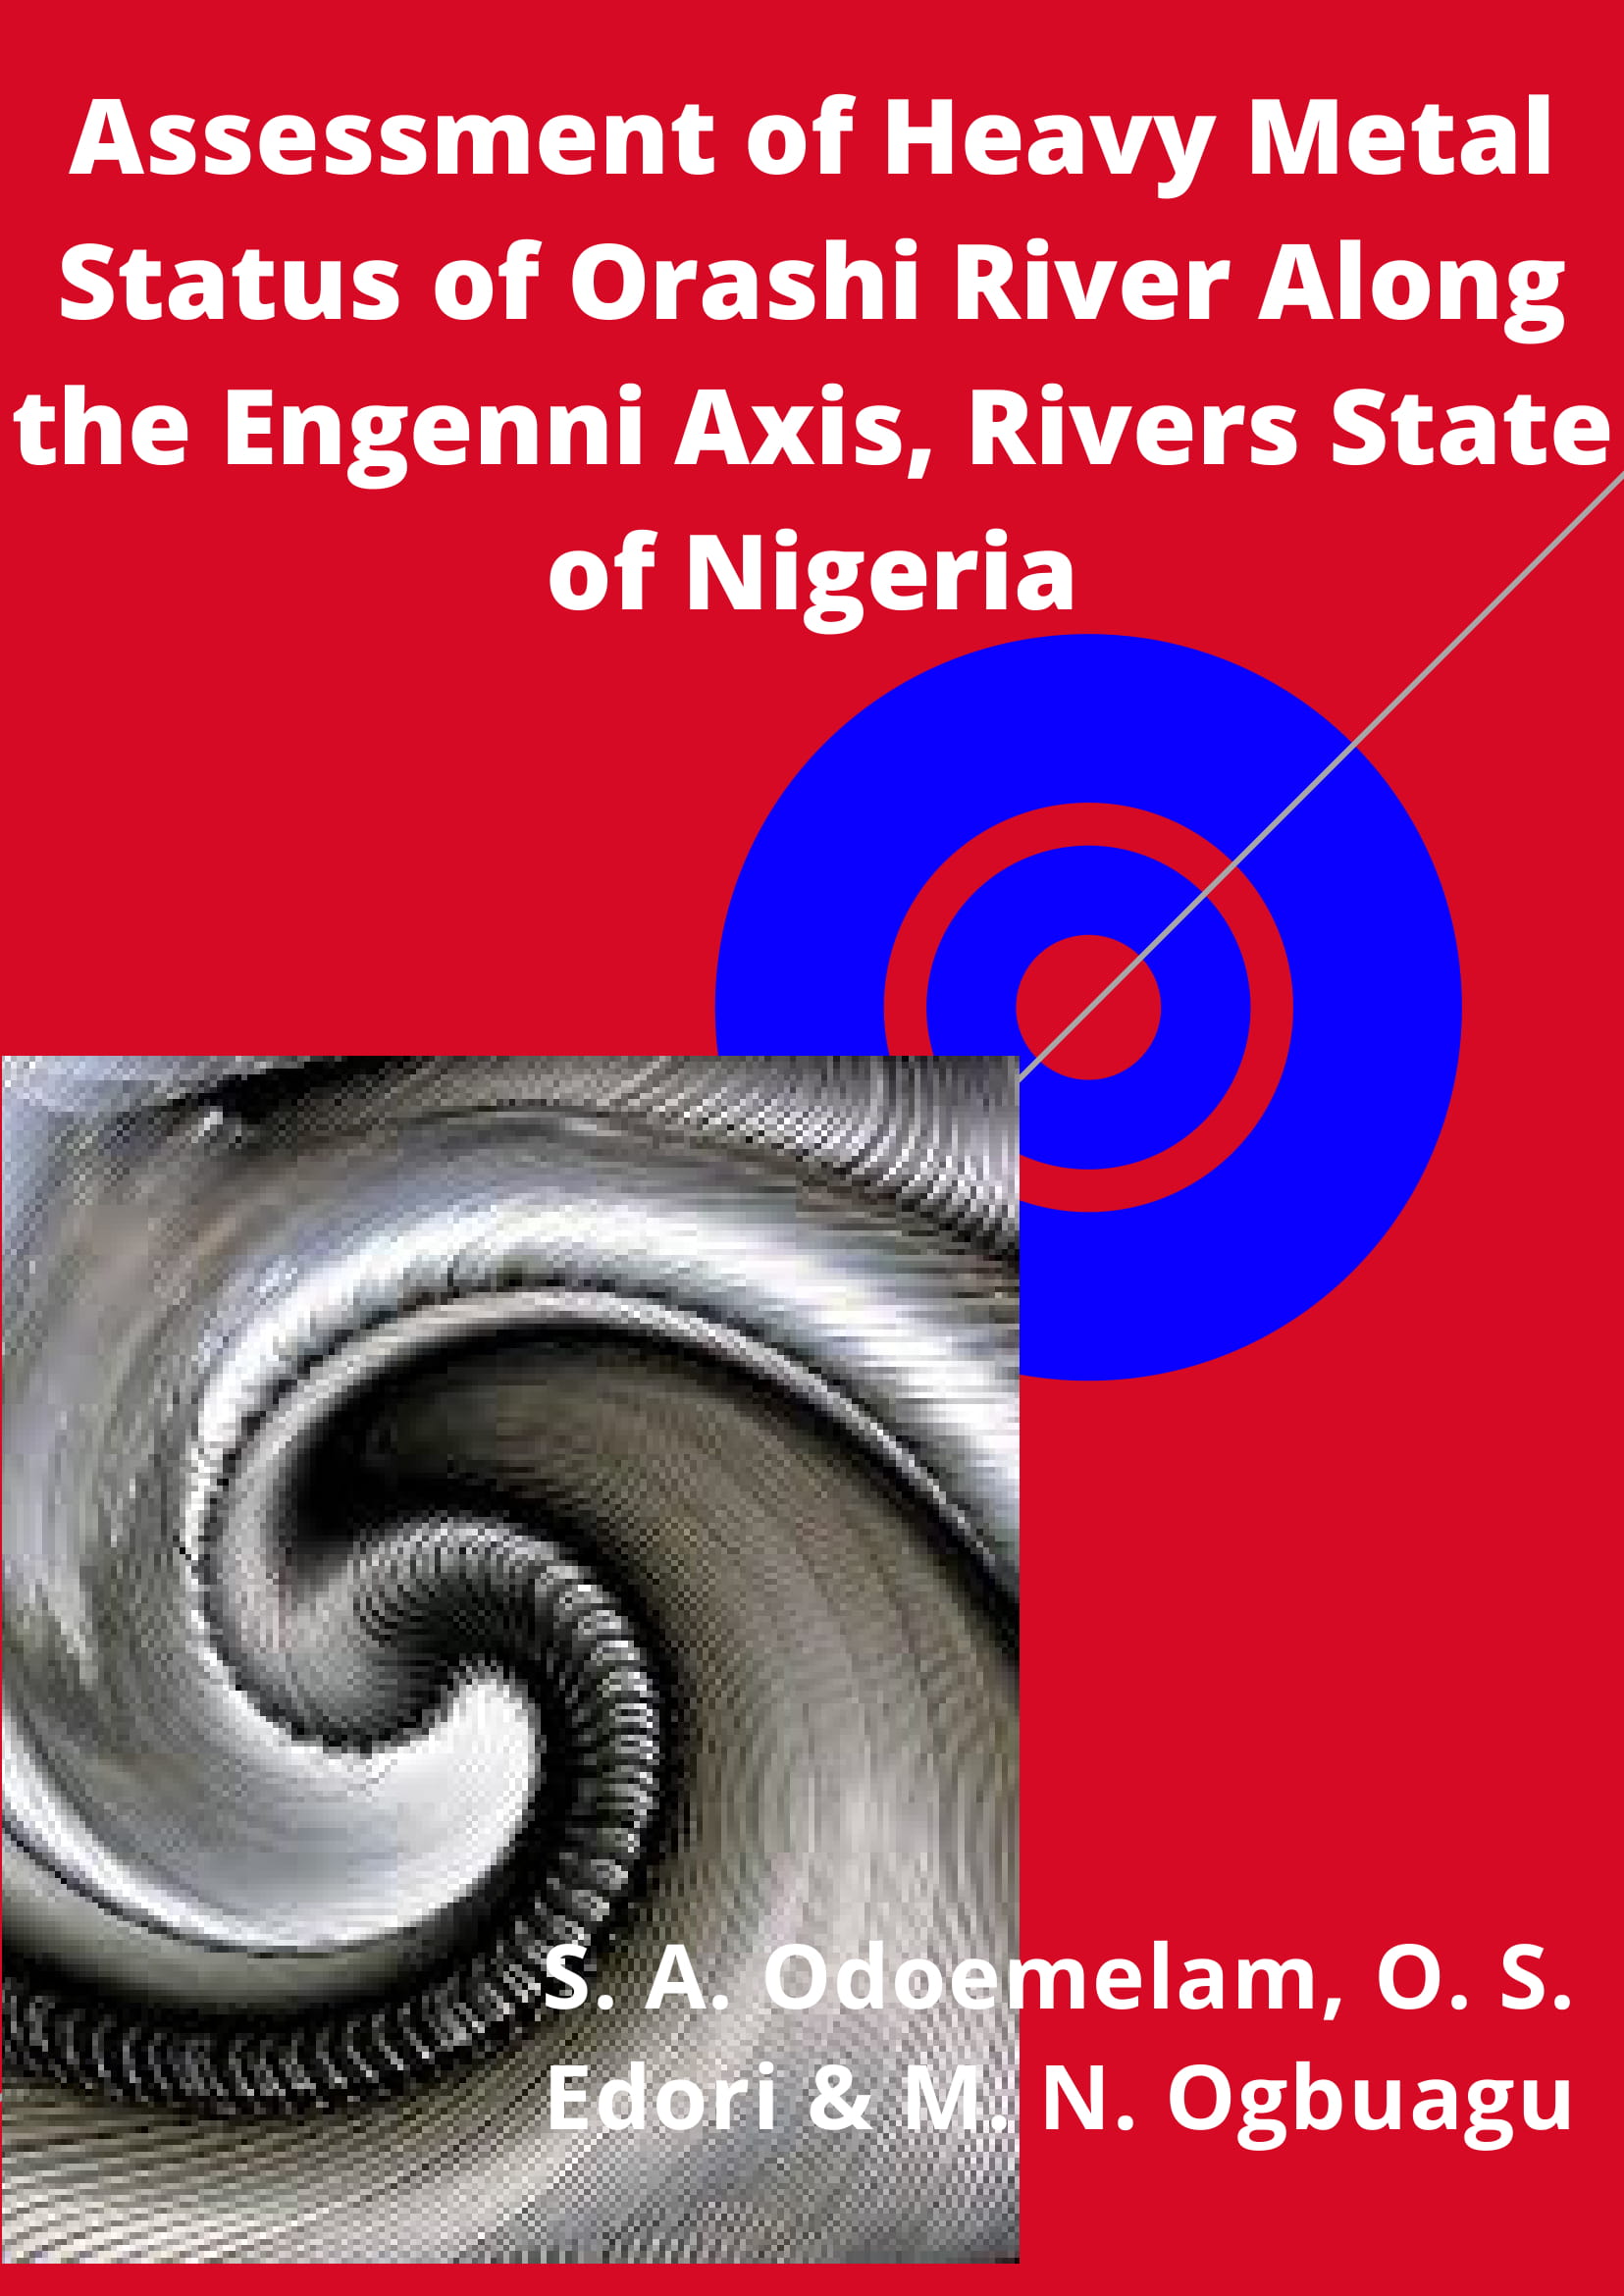 Assessment of Heavy Metal Status of Orashi River Along the Engenni Axis, Rivers State of Nigeria  image